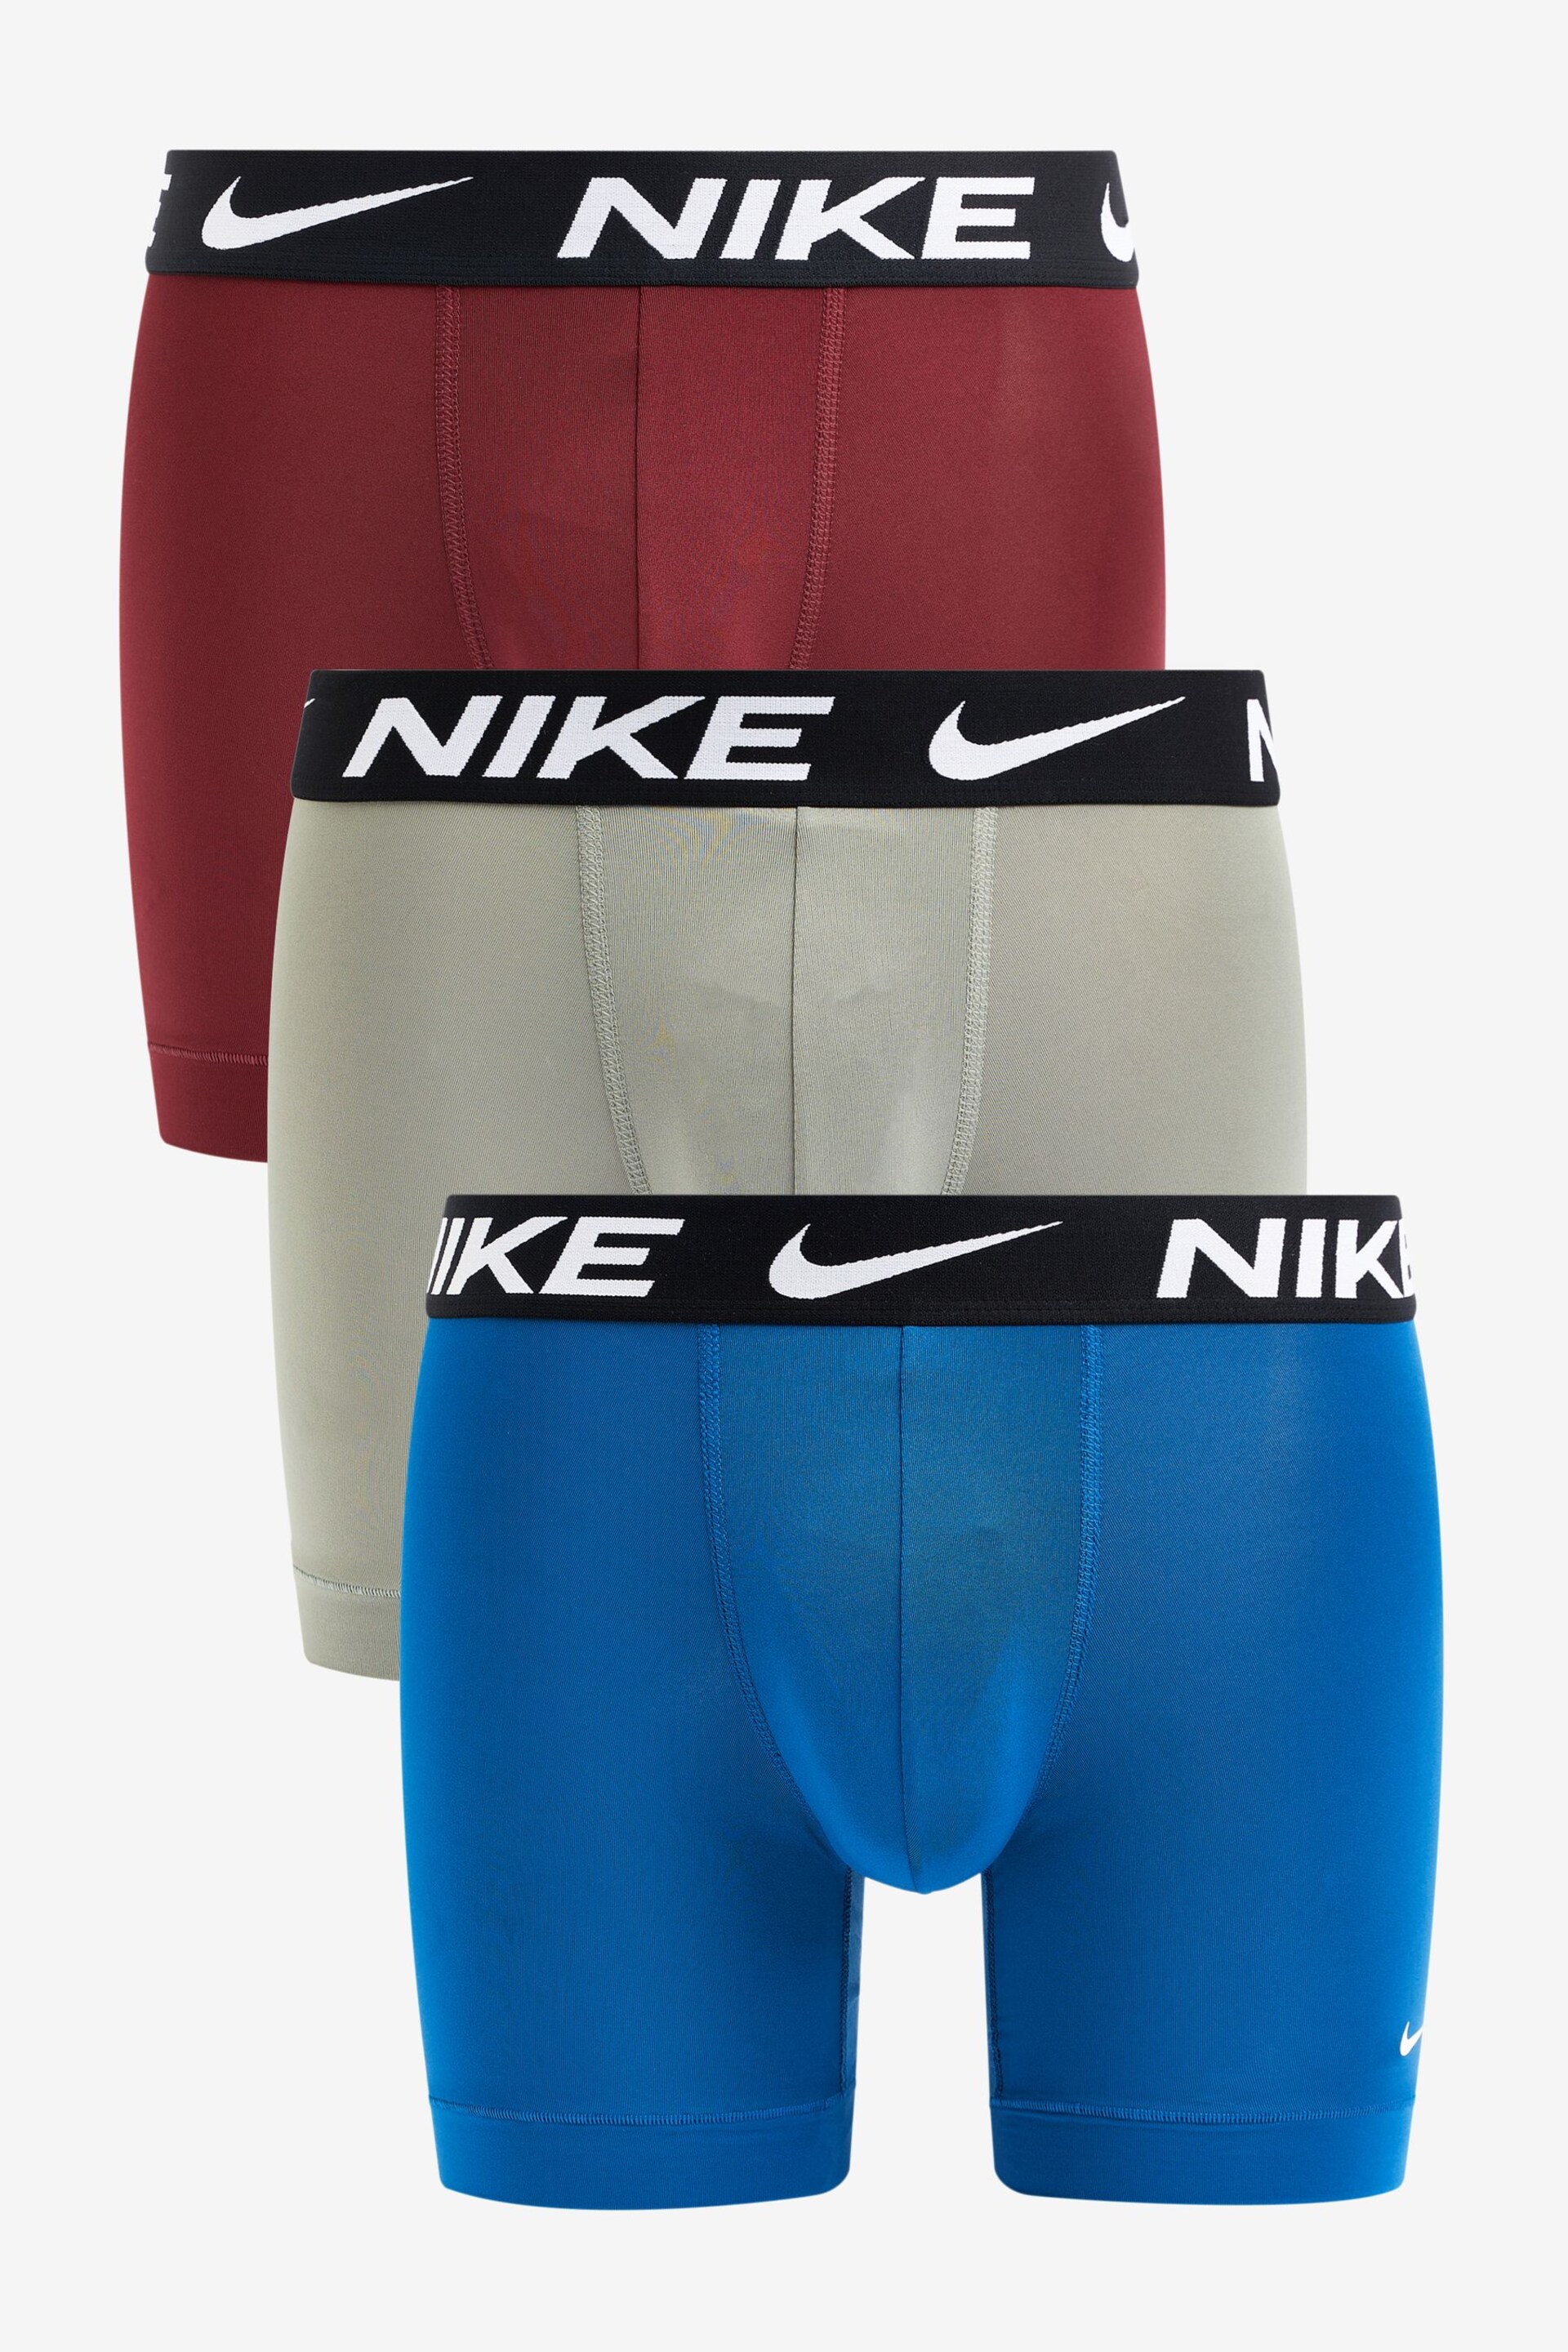 Nike Blue Boxer 3 Pack - Image 1 of 4